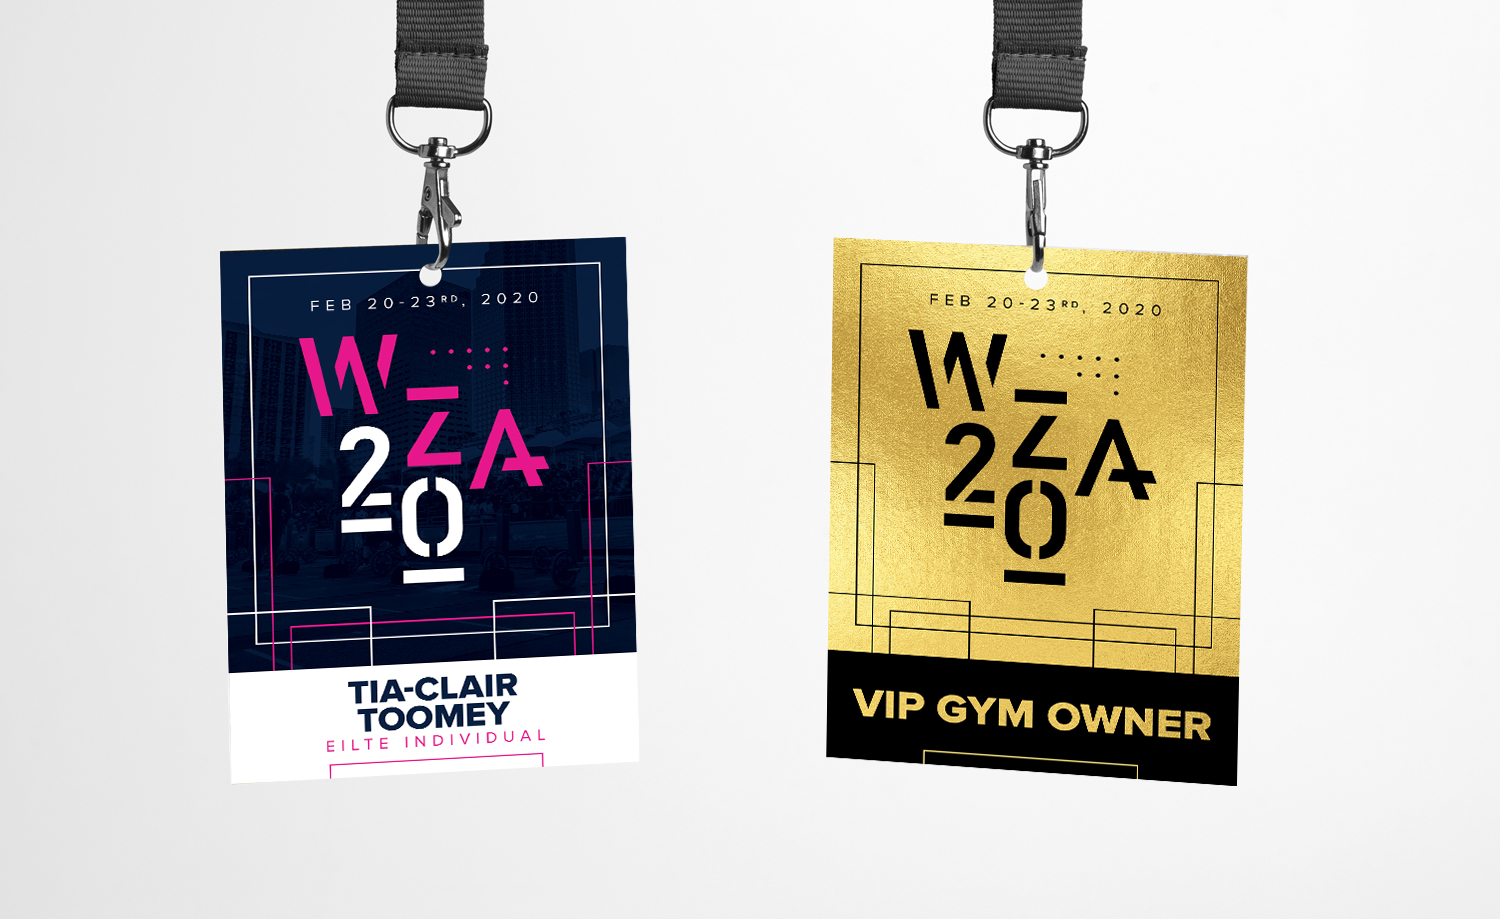 wza 2020 credential